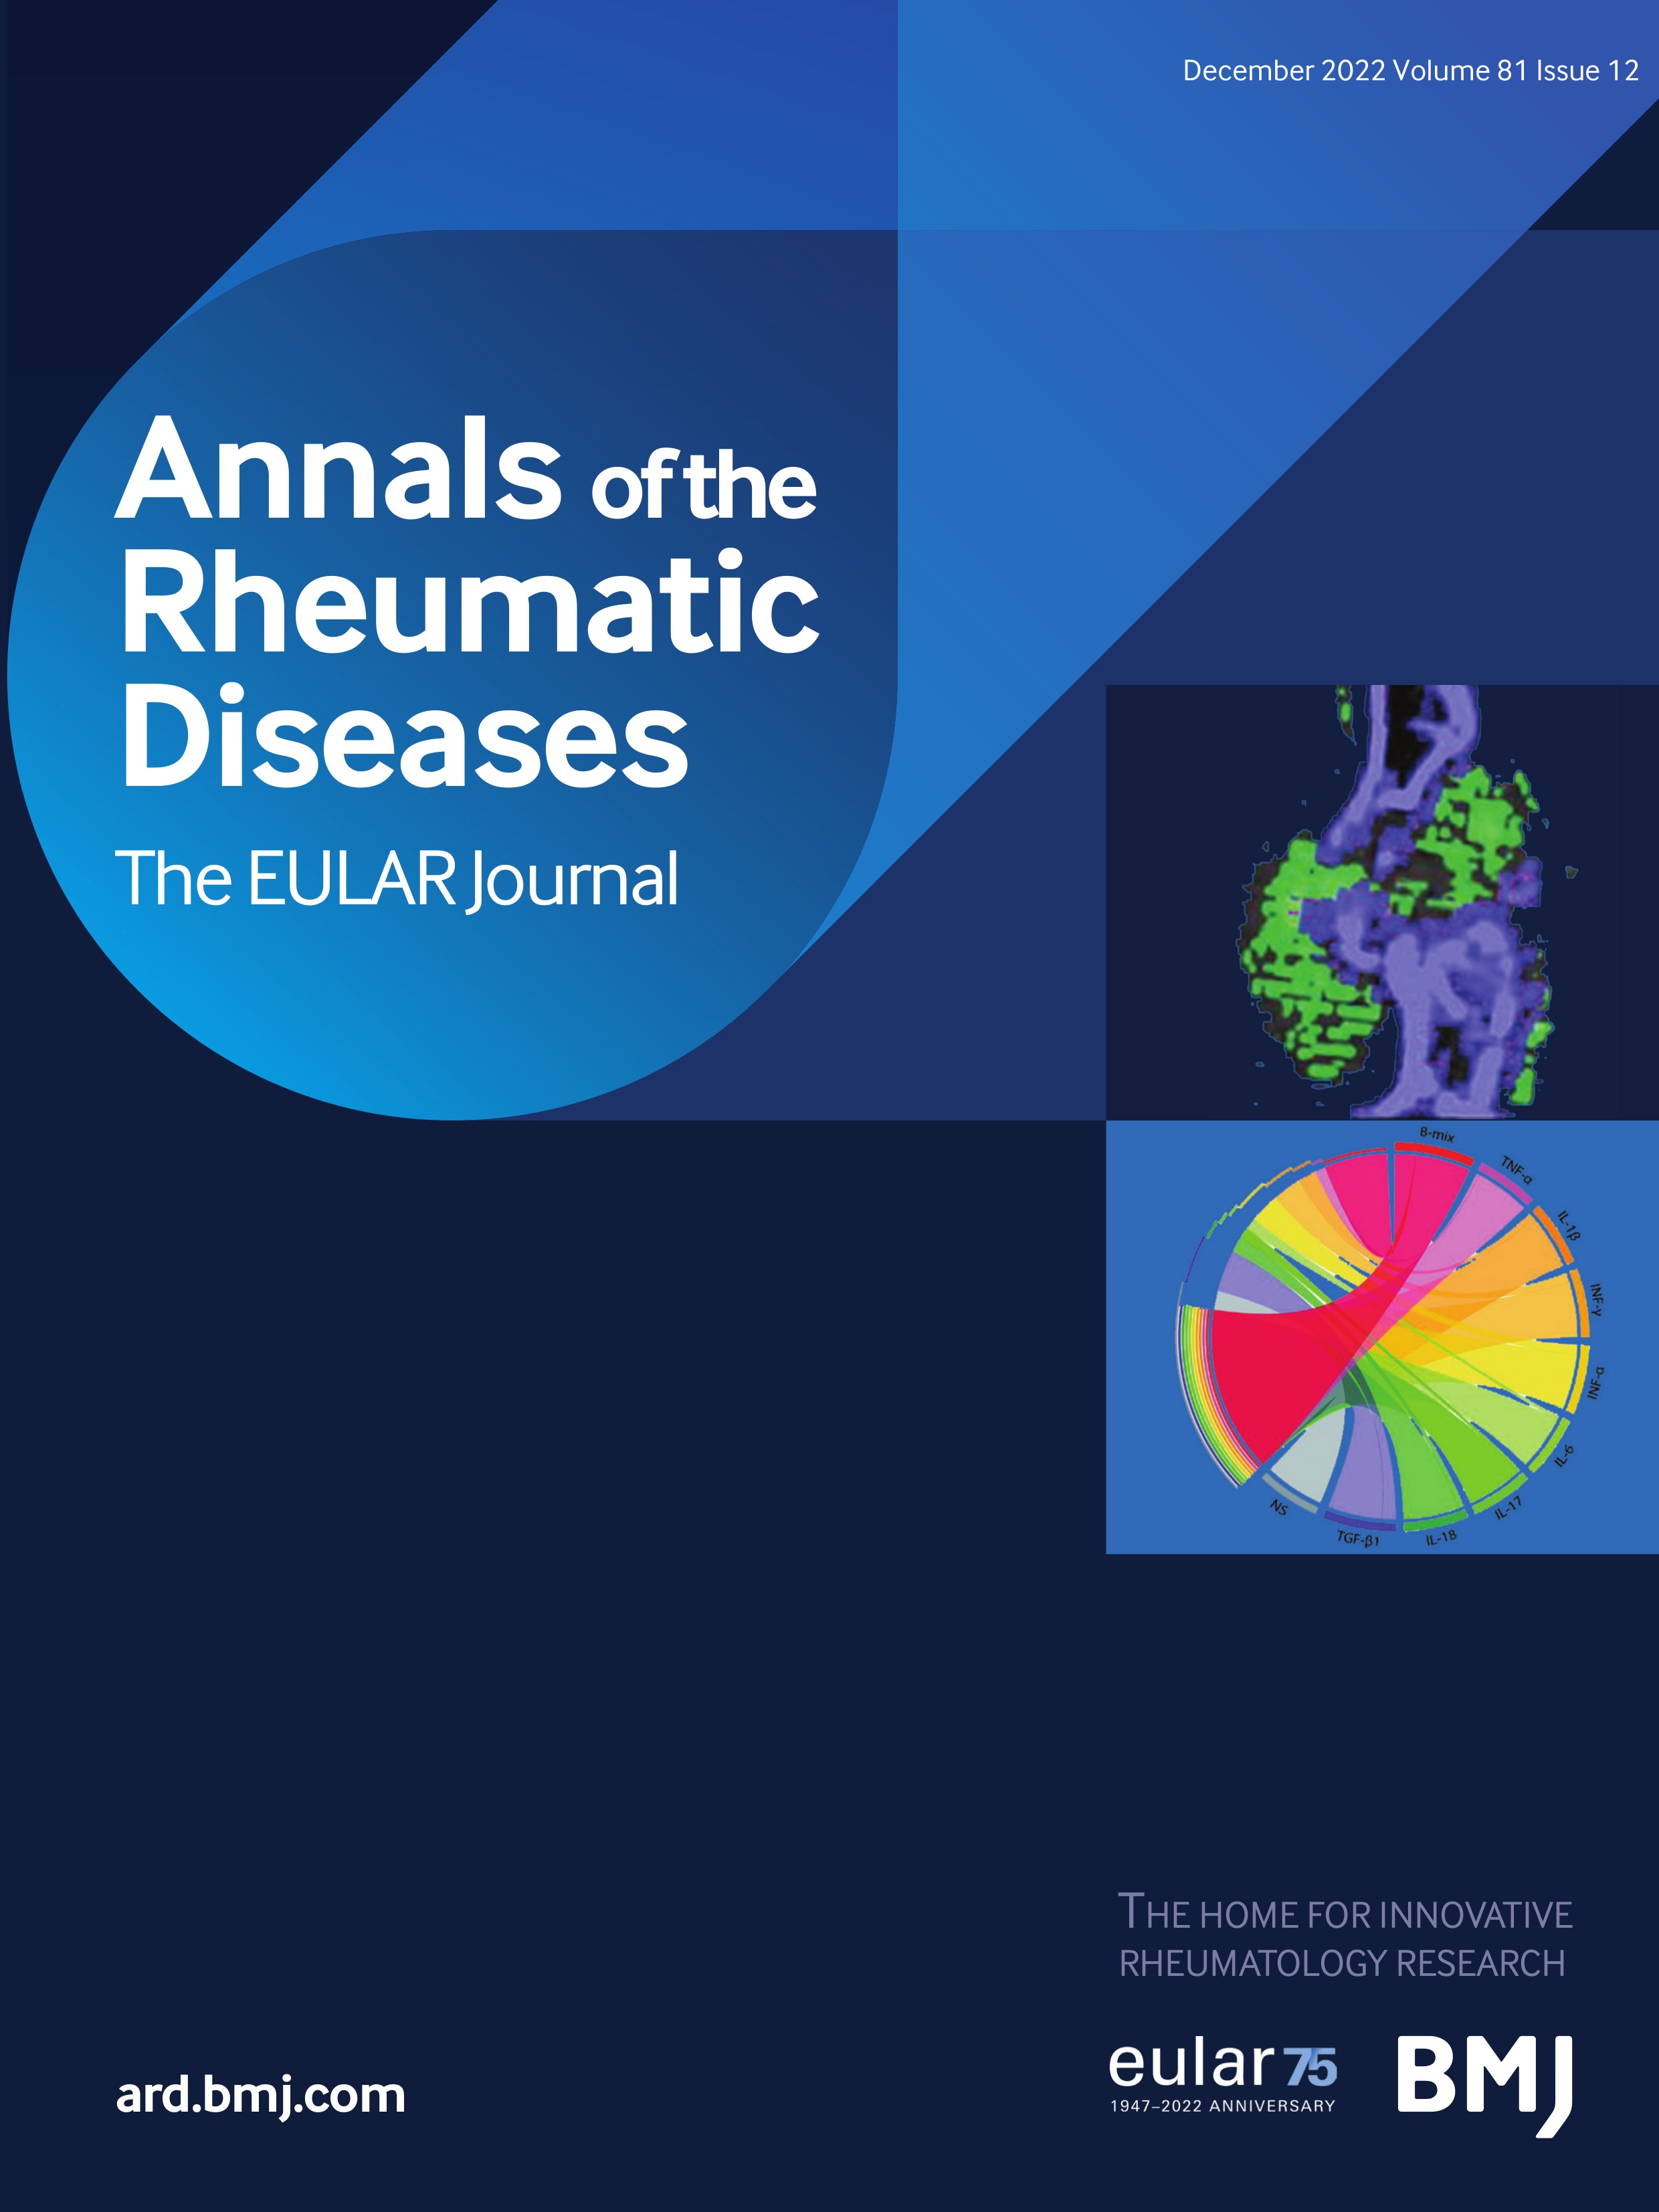 Temporal trends in COVID-19 outcomes among patients with systemic autoimmune rheumatic diseases: from the first wave through the initial Omicron wave